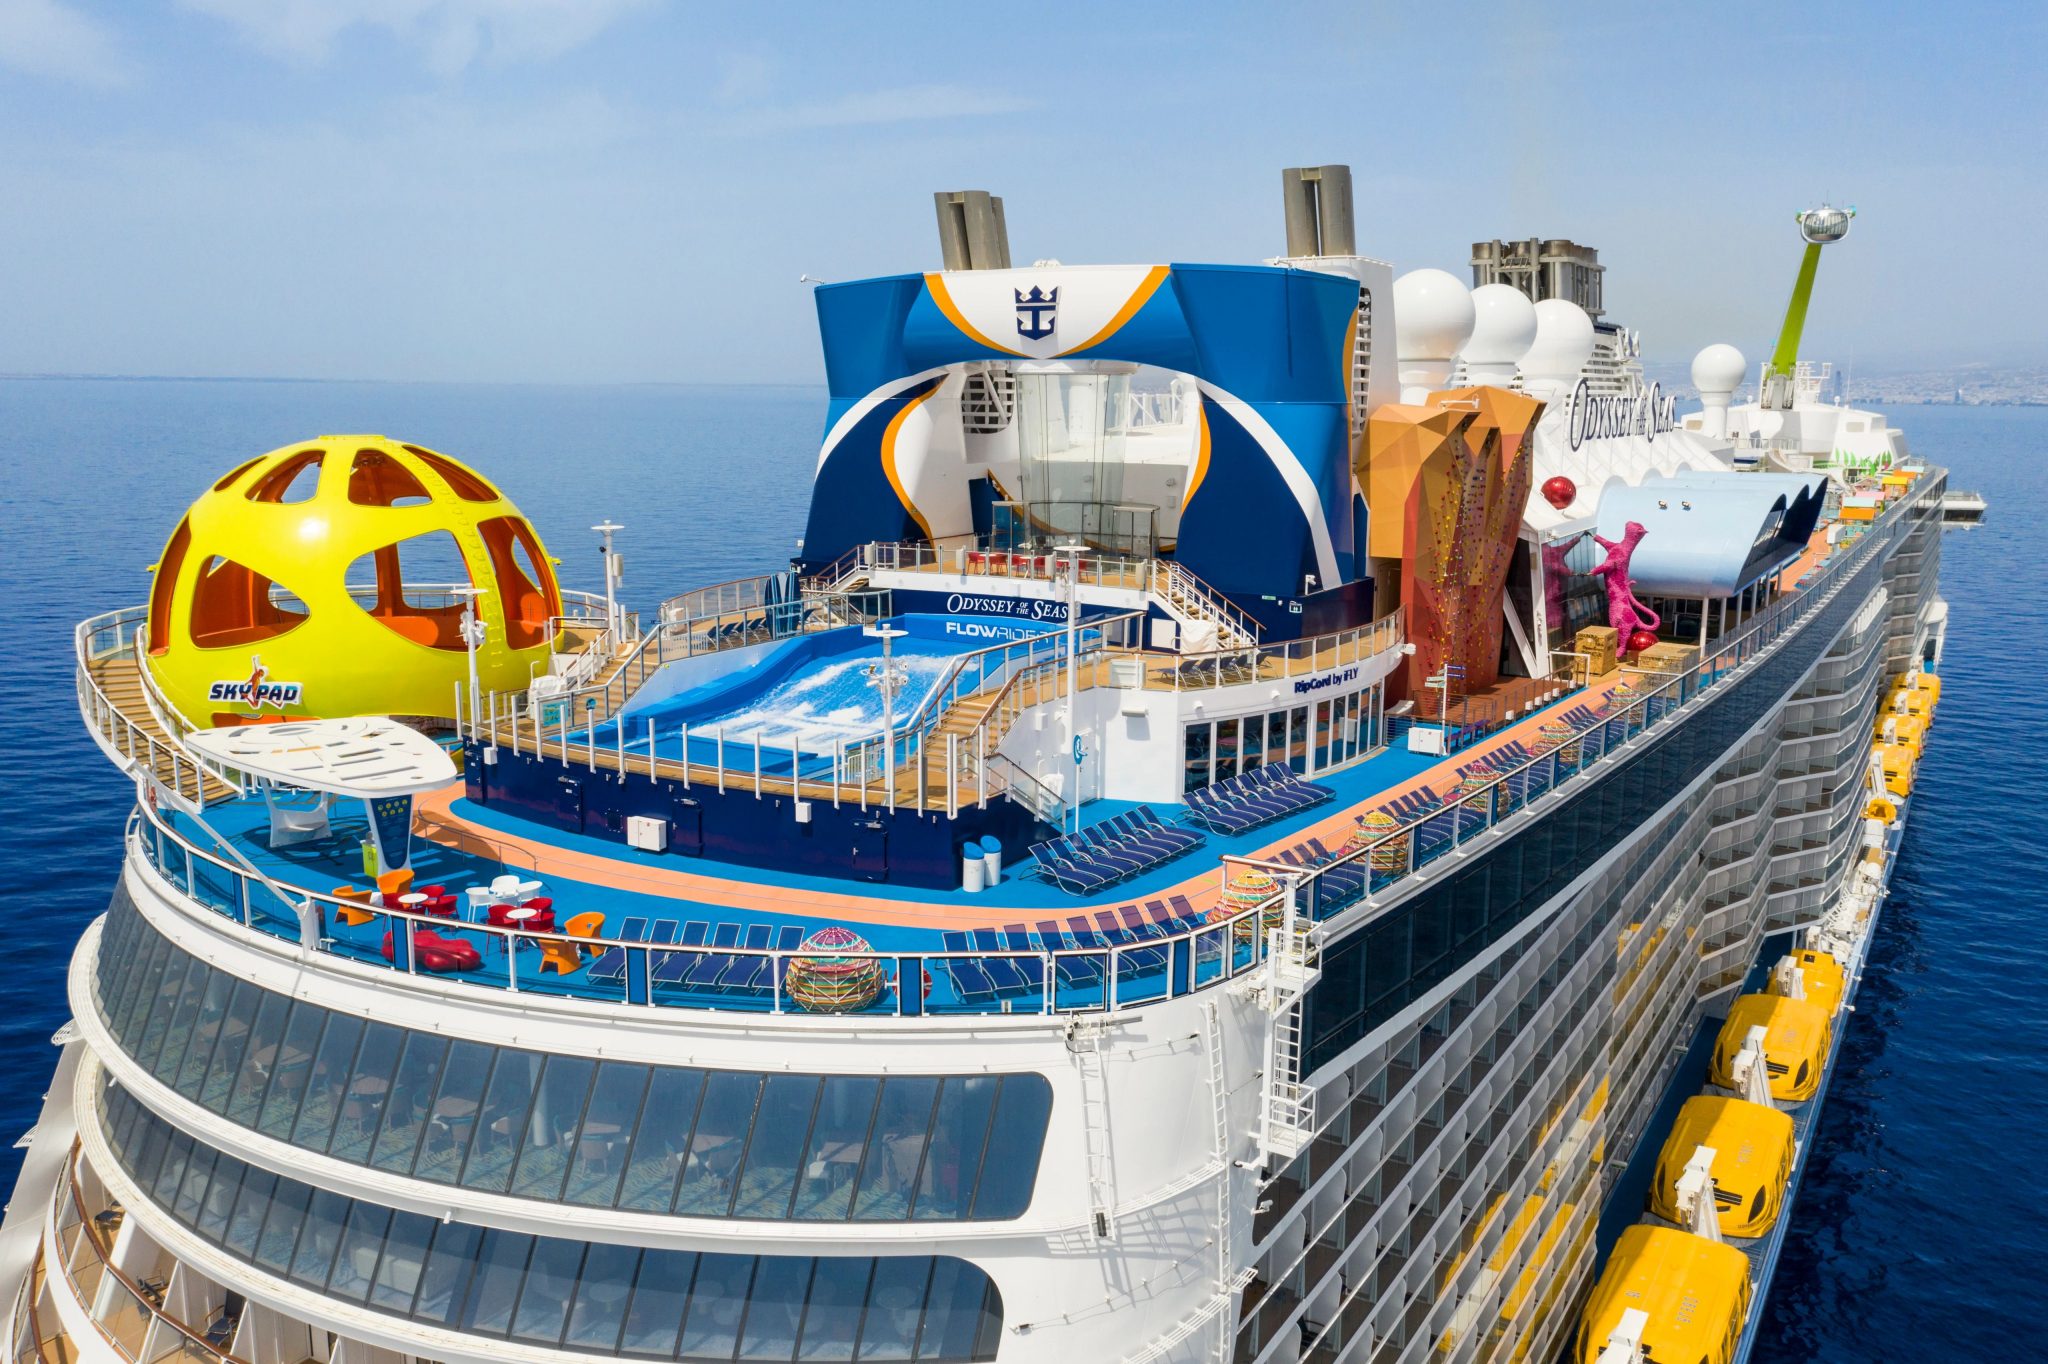 A Captain’s Inside Look at Odyssey of the Seas | Royal Caribbean Blog